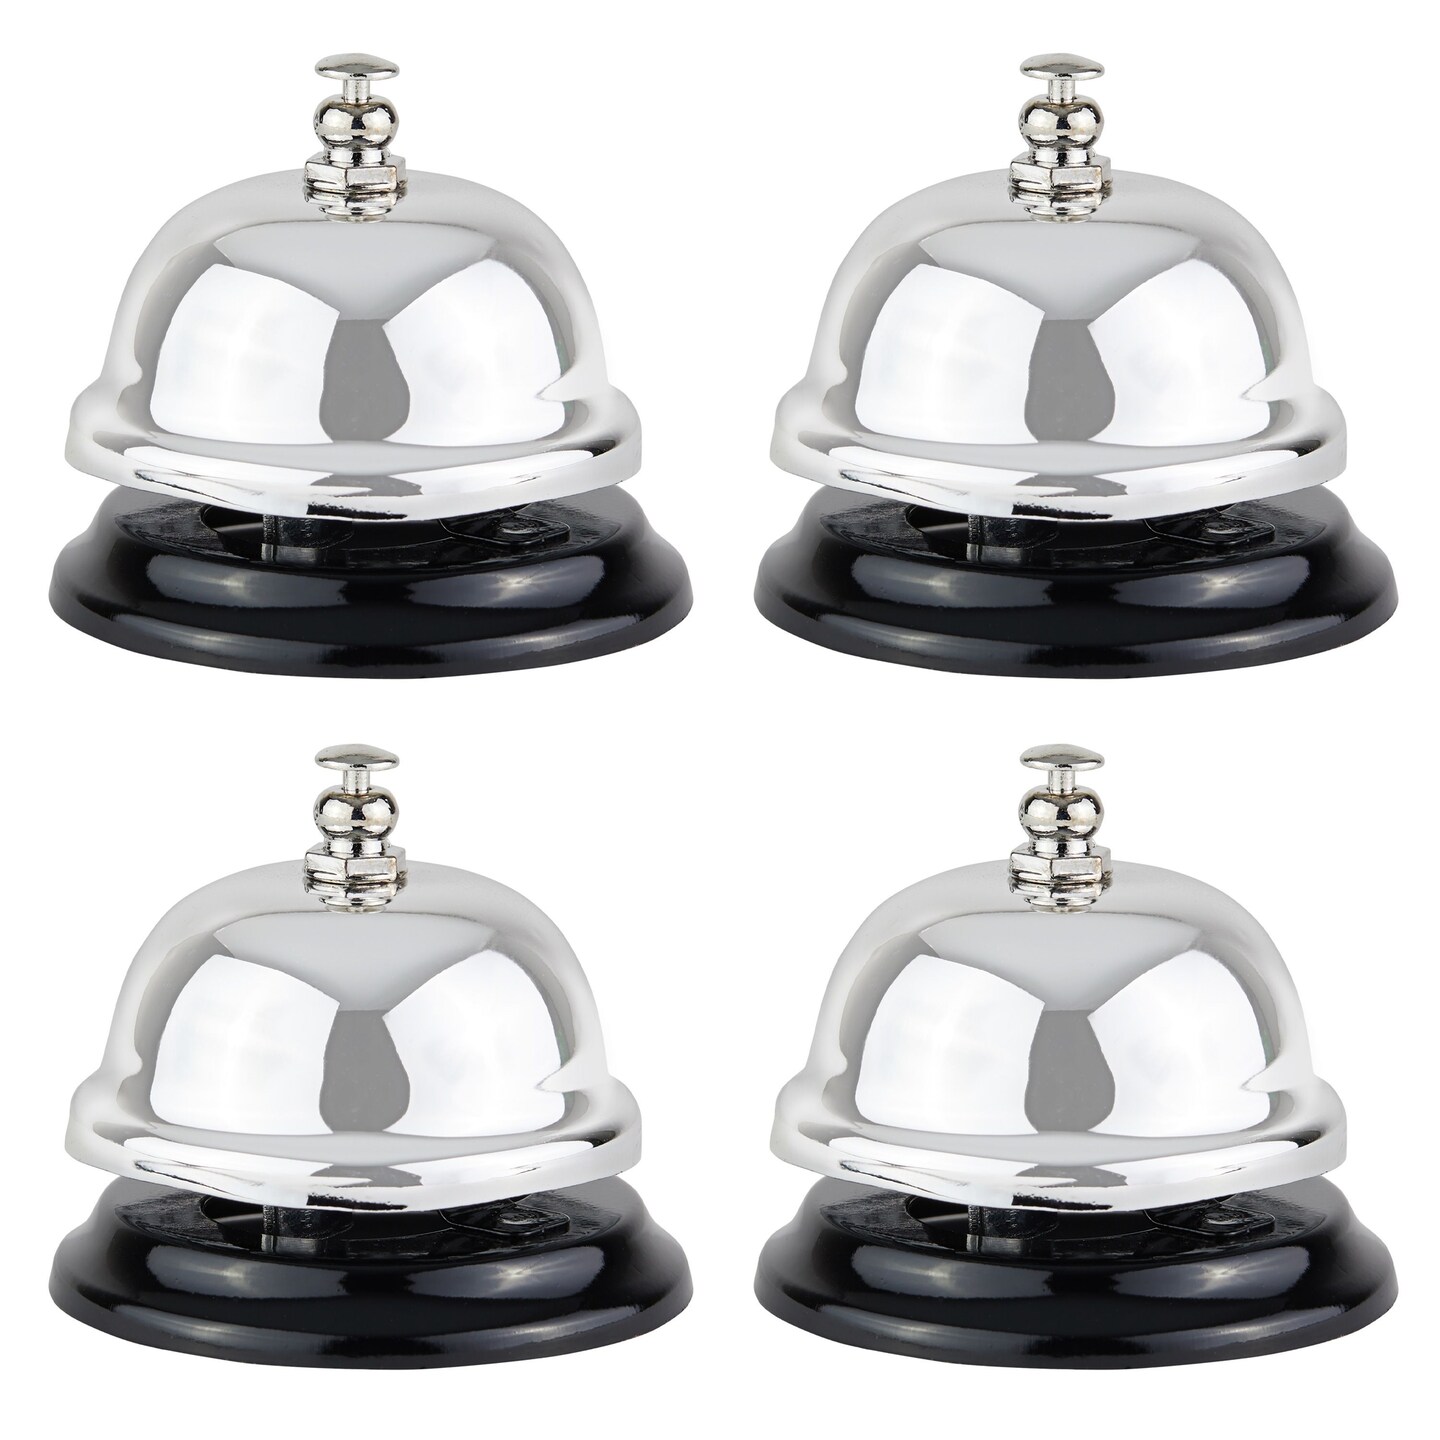 4 Pack Mini Call Bell for Front Desk, Hotel Service, Kitchen Counter, Restaurants (Silver, 2.5x2 in)